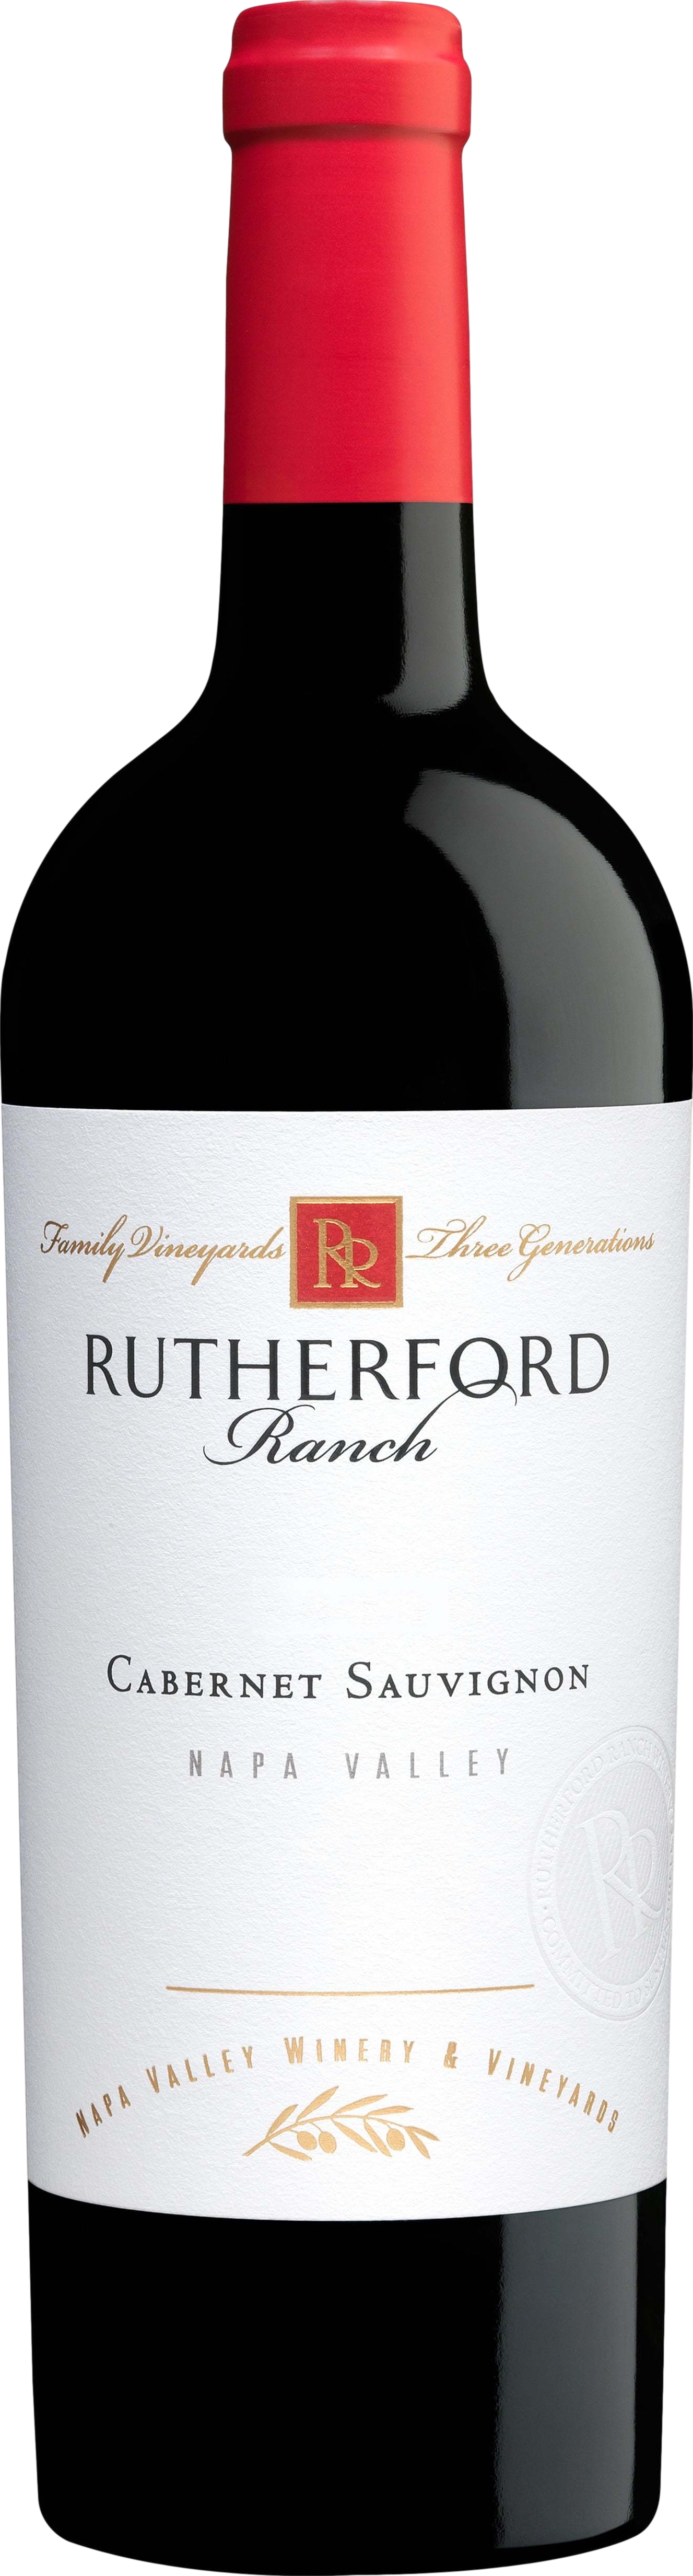 Rutherford Rancch Rutherford Ranch Cabernet Sauvignon 2015